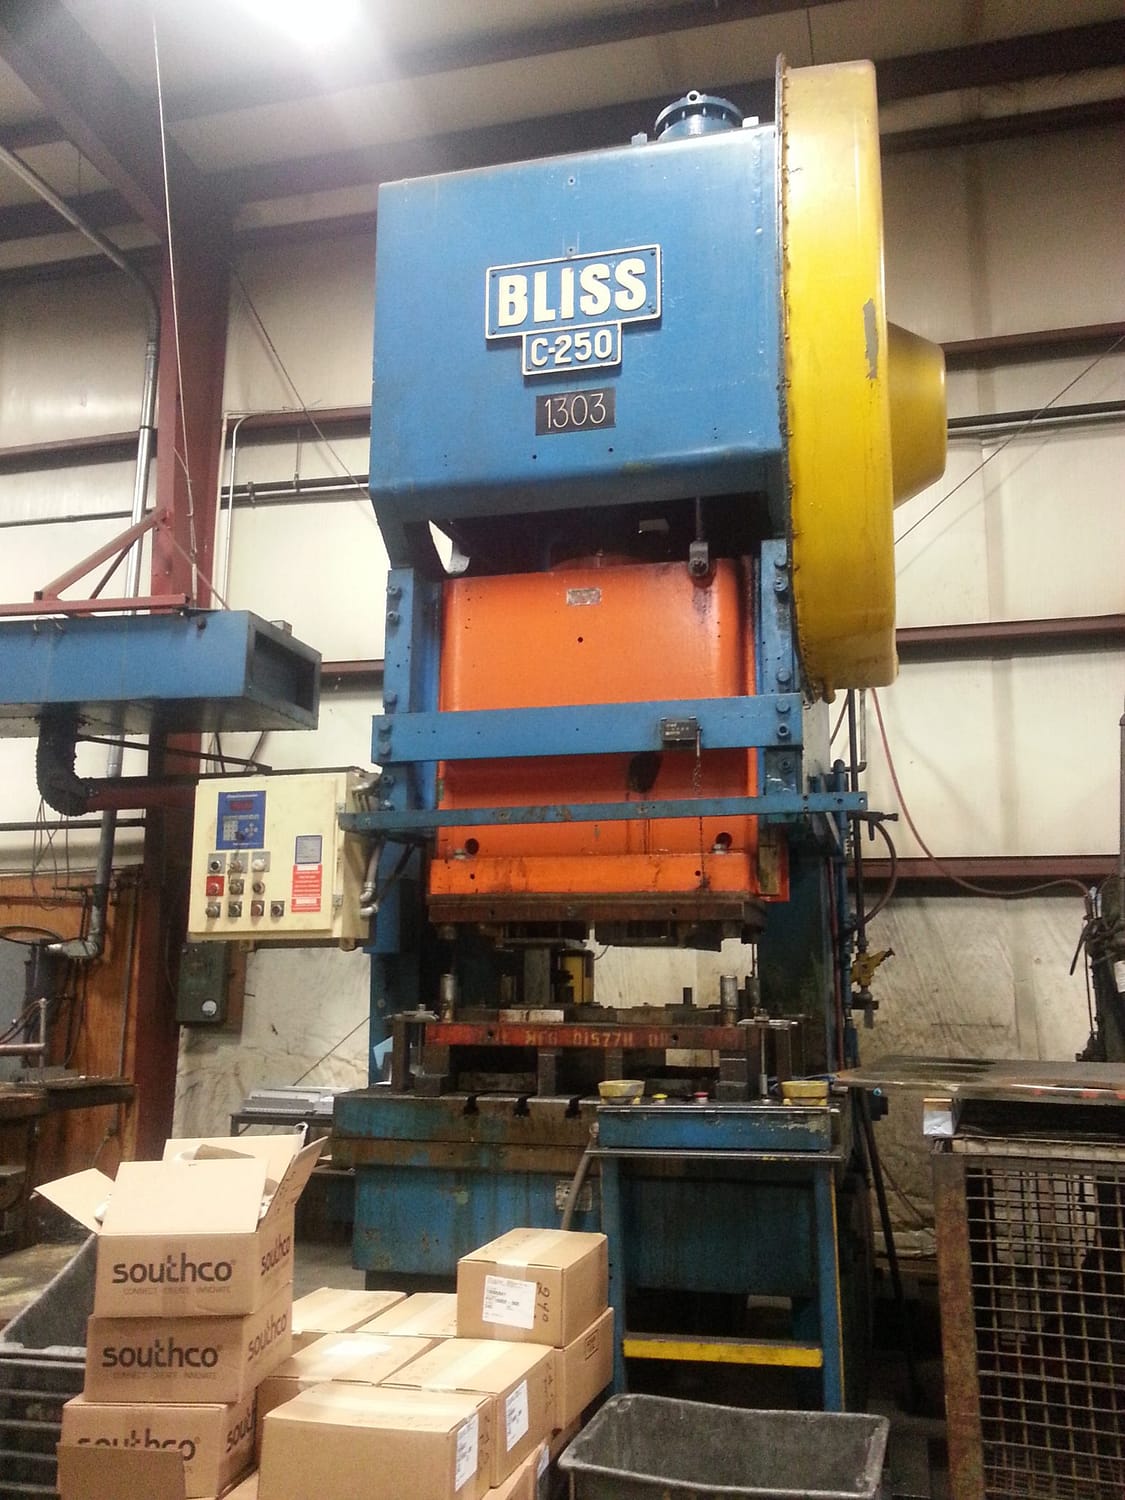 250 Bliss Press For Sale